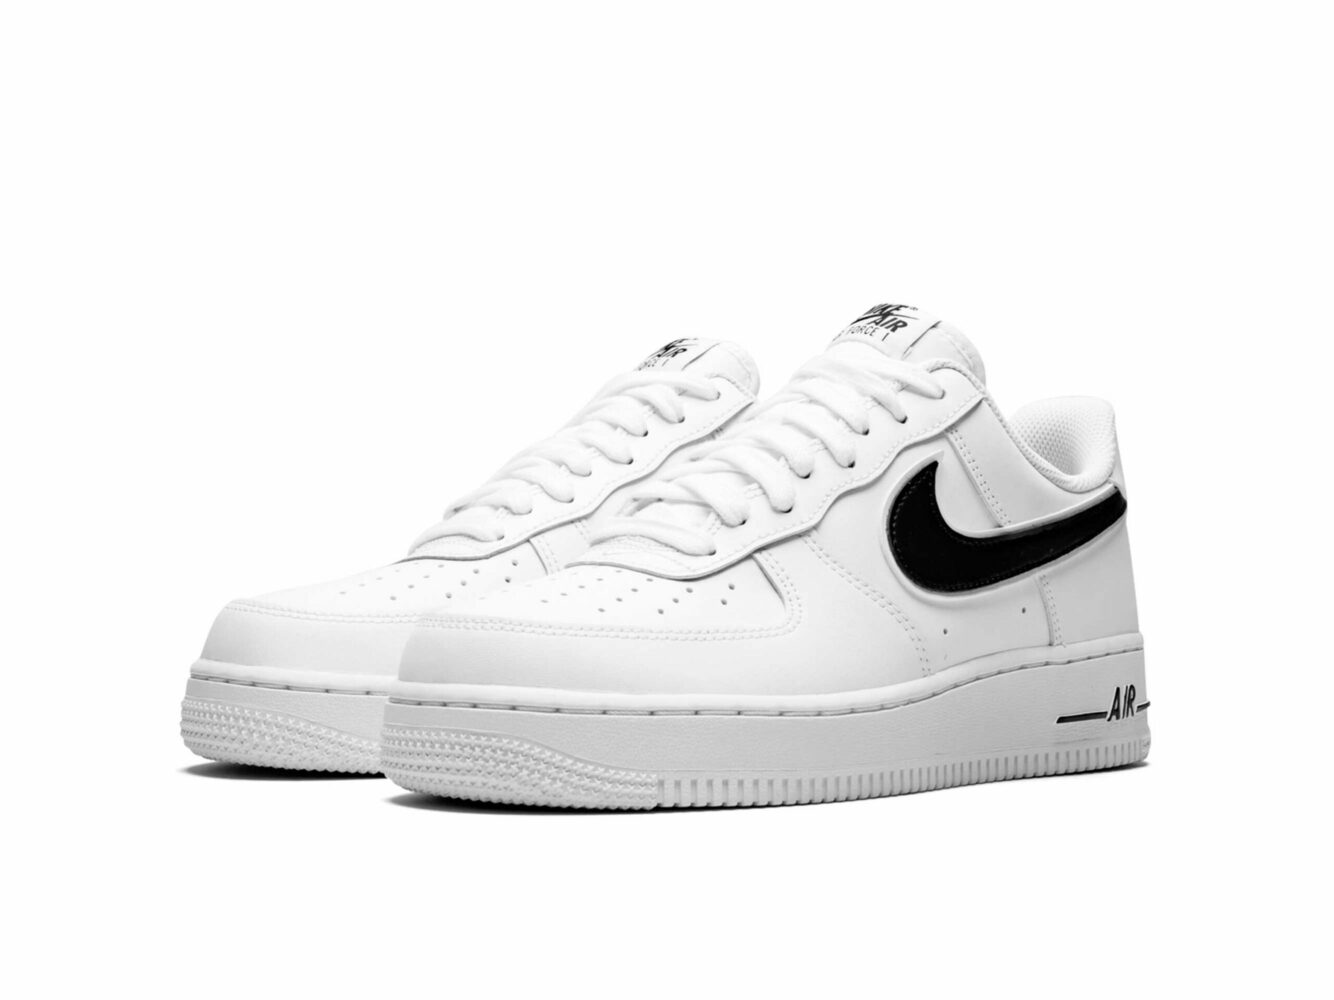 nike air force 1 low black and white AO2423_101 купить